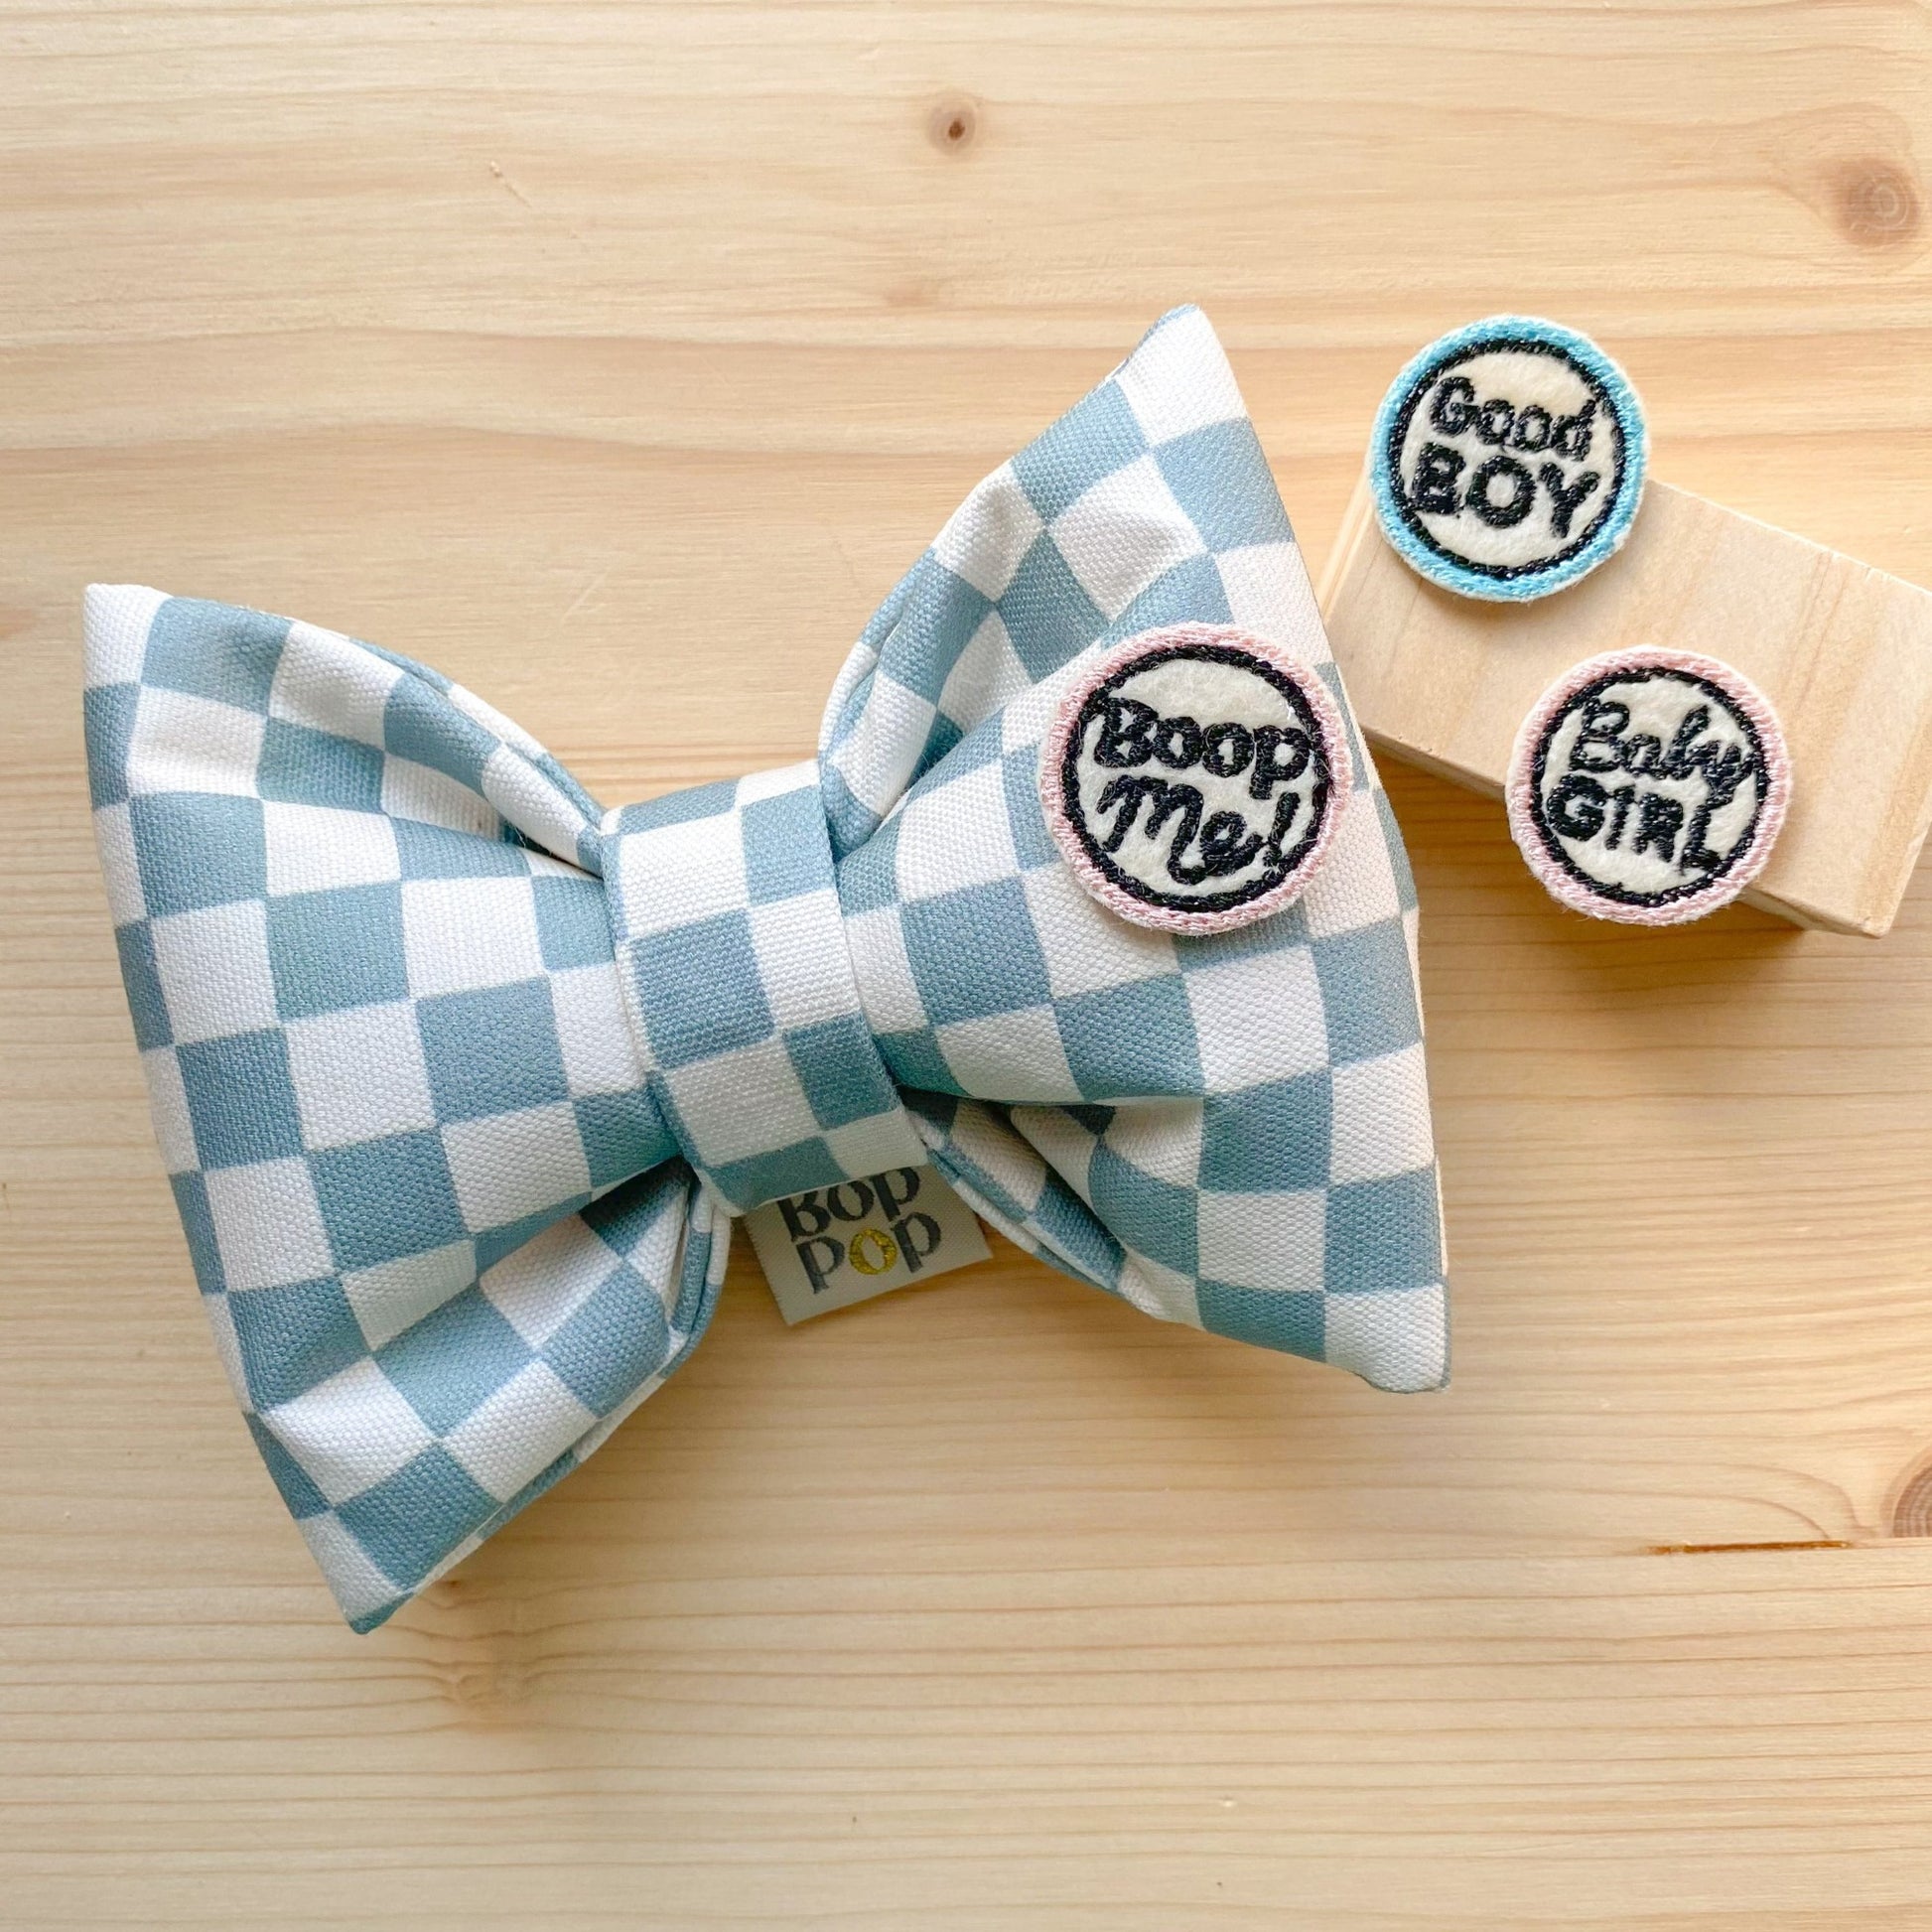 bluestone organic cotton canvas pet dog cat bow tie pet apparel blue grey checkerboard fabric with elastic loop collar attachment bop pop pets Big Puppa Bow ties embroidery patches Boop Me Good Boy Baby Girl